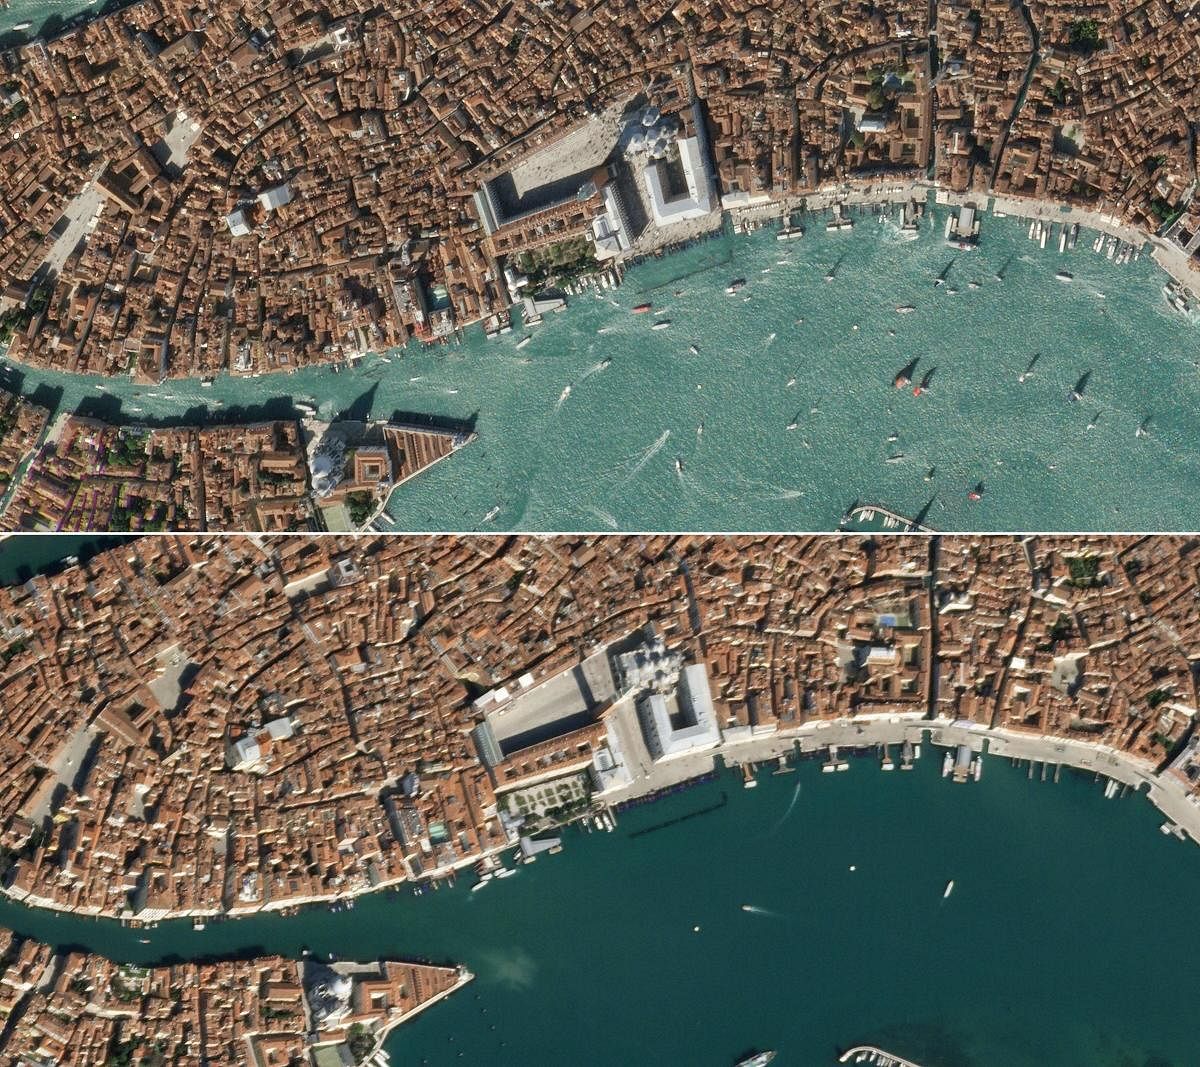 This combination of pictures created on March 19, 2020 using handout satellite images released by Maxar Technologies shows boats in the waters off of San Marco square (C) in Venice, Italy (top) and nearly empty waters off of San Marco square on March 18, 2020, during the novel coronavirus, COVID-19 outbreak. (AFP Photo)